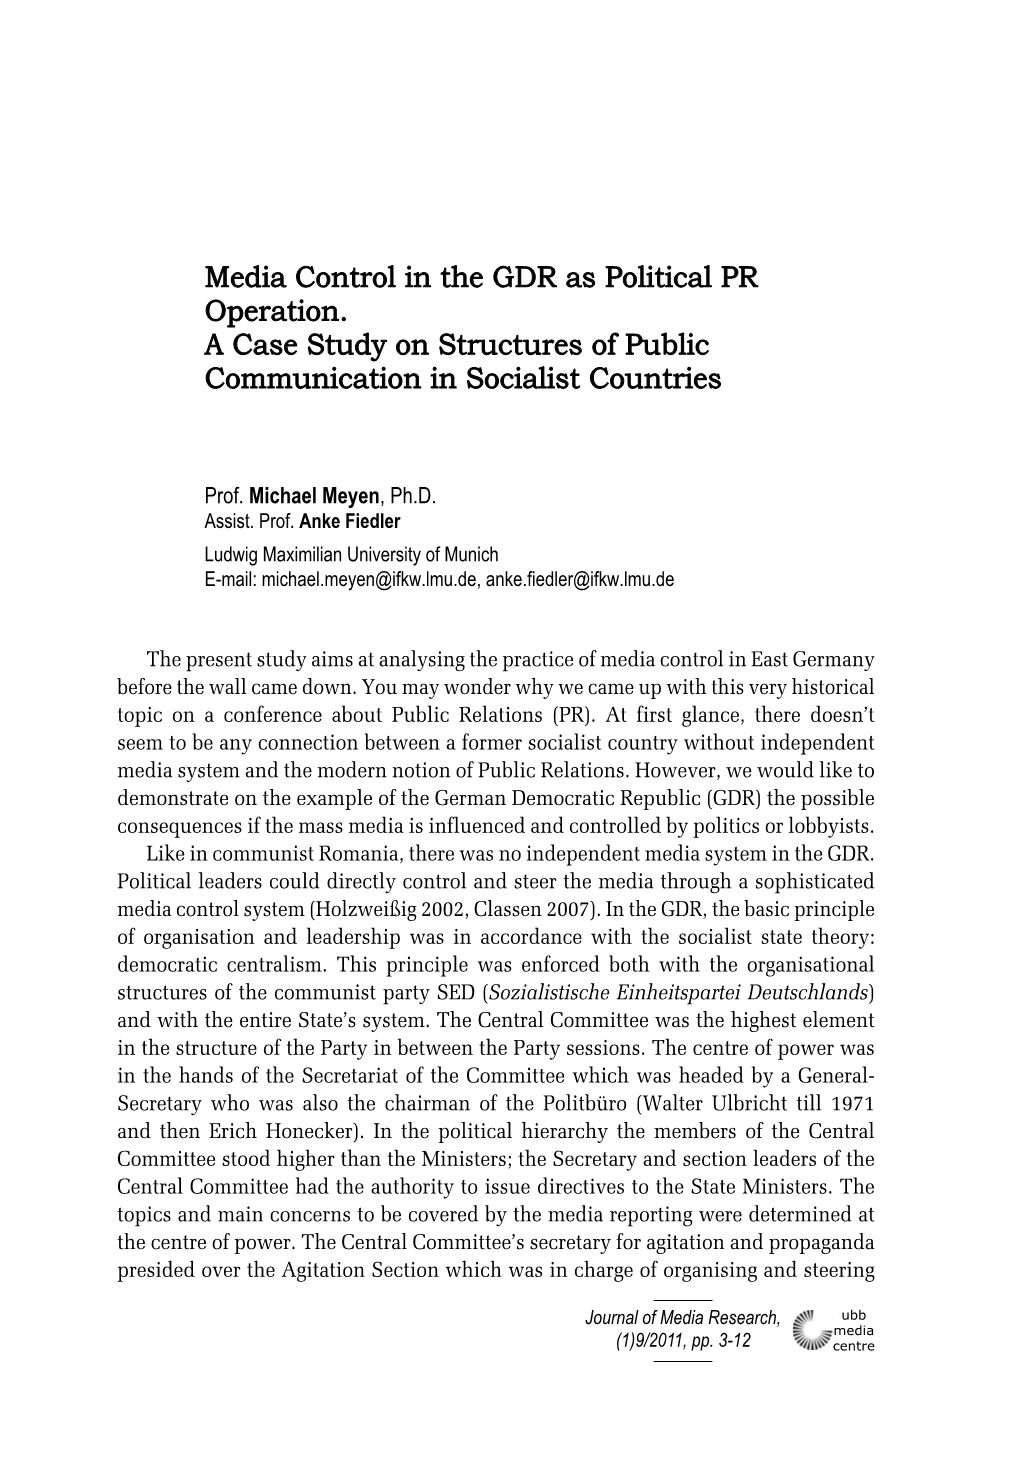 Media Control in the GDR As Political PR Operation. a Case Study On